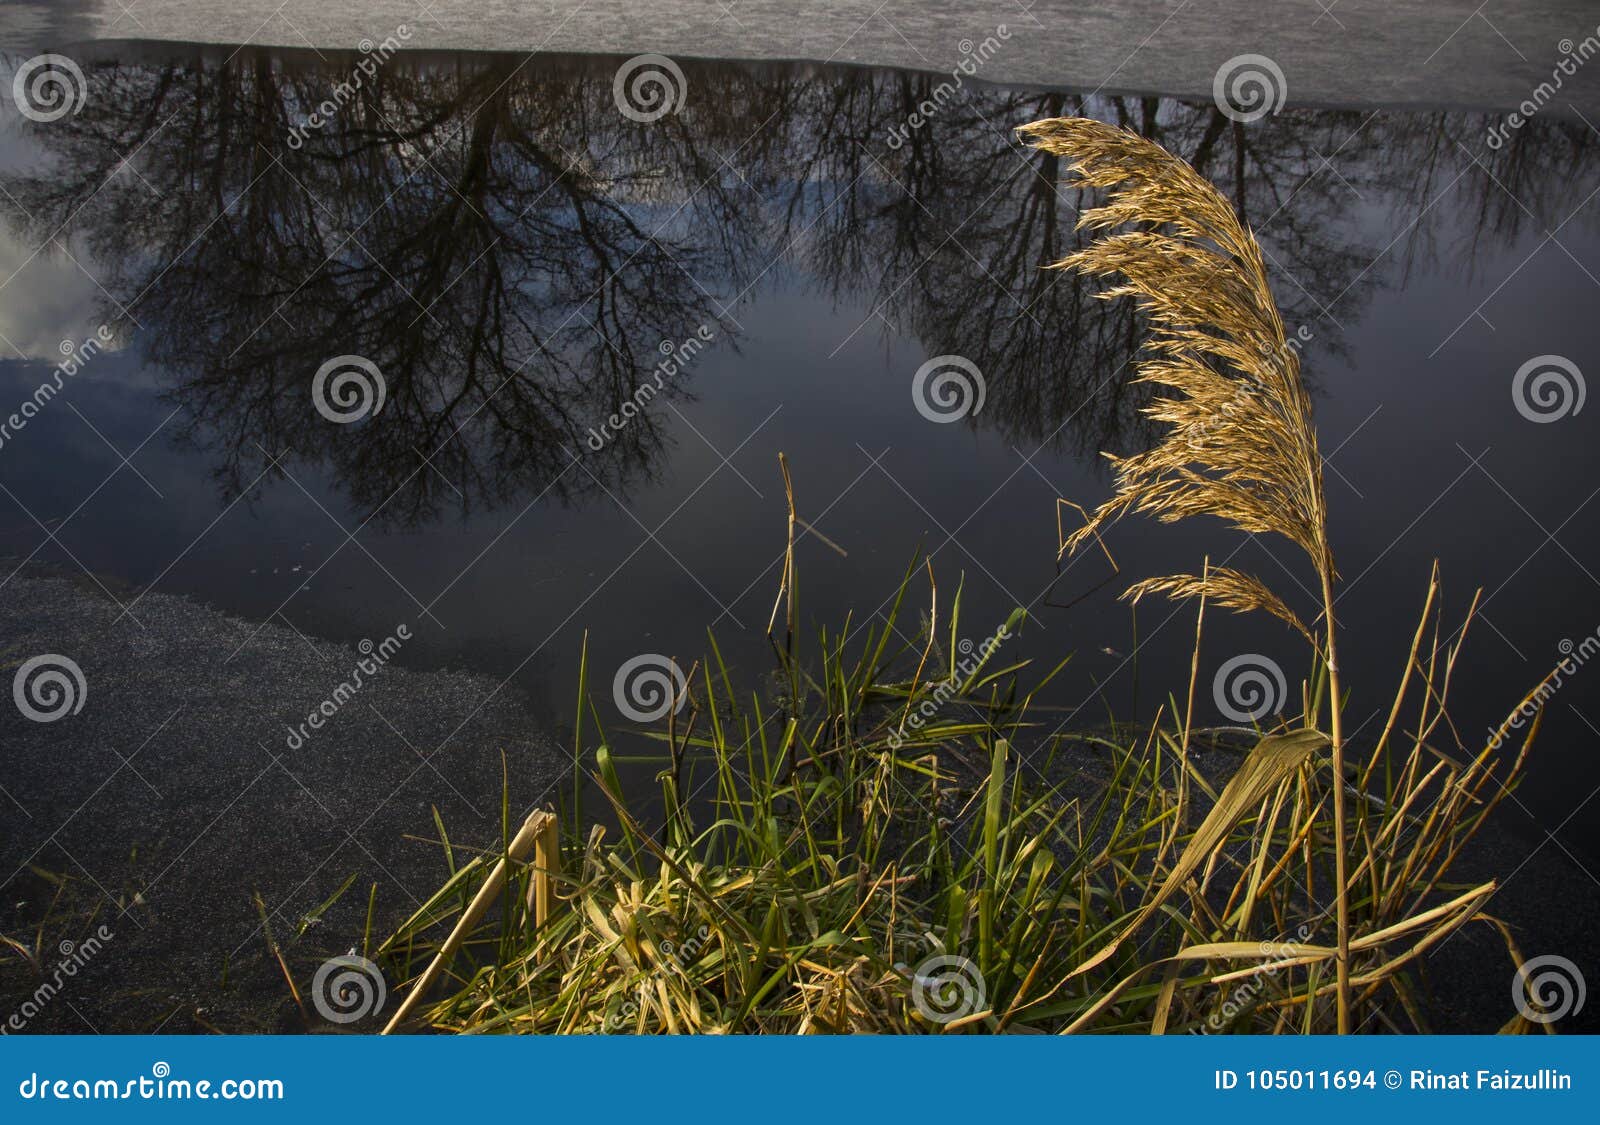 Stalks Of Dried Reeds On The Shore Of A Freezing Lake Stock Photo